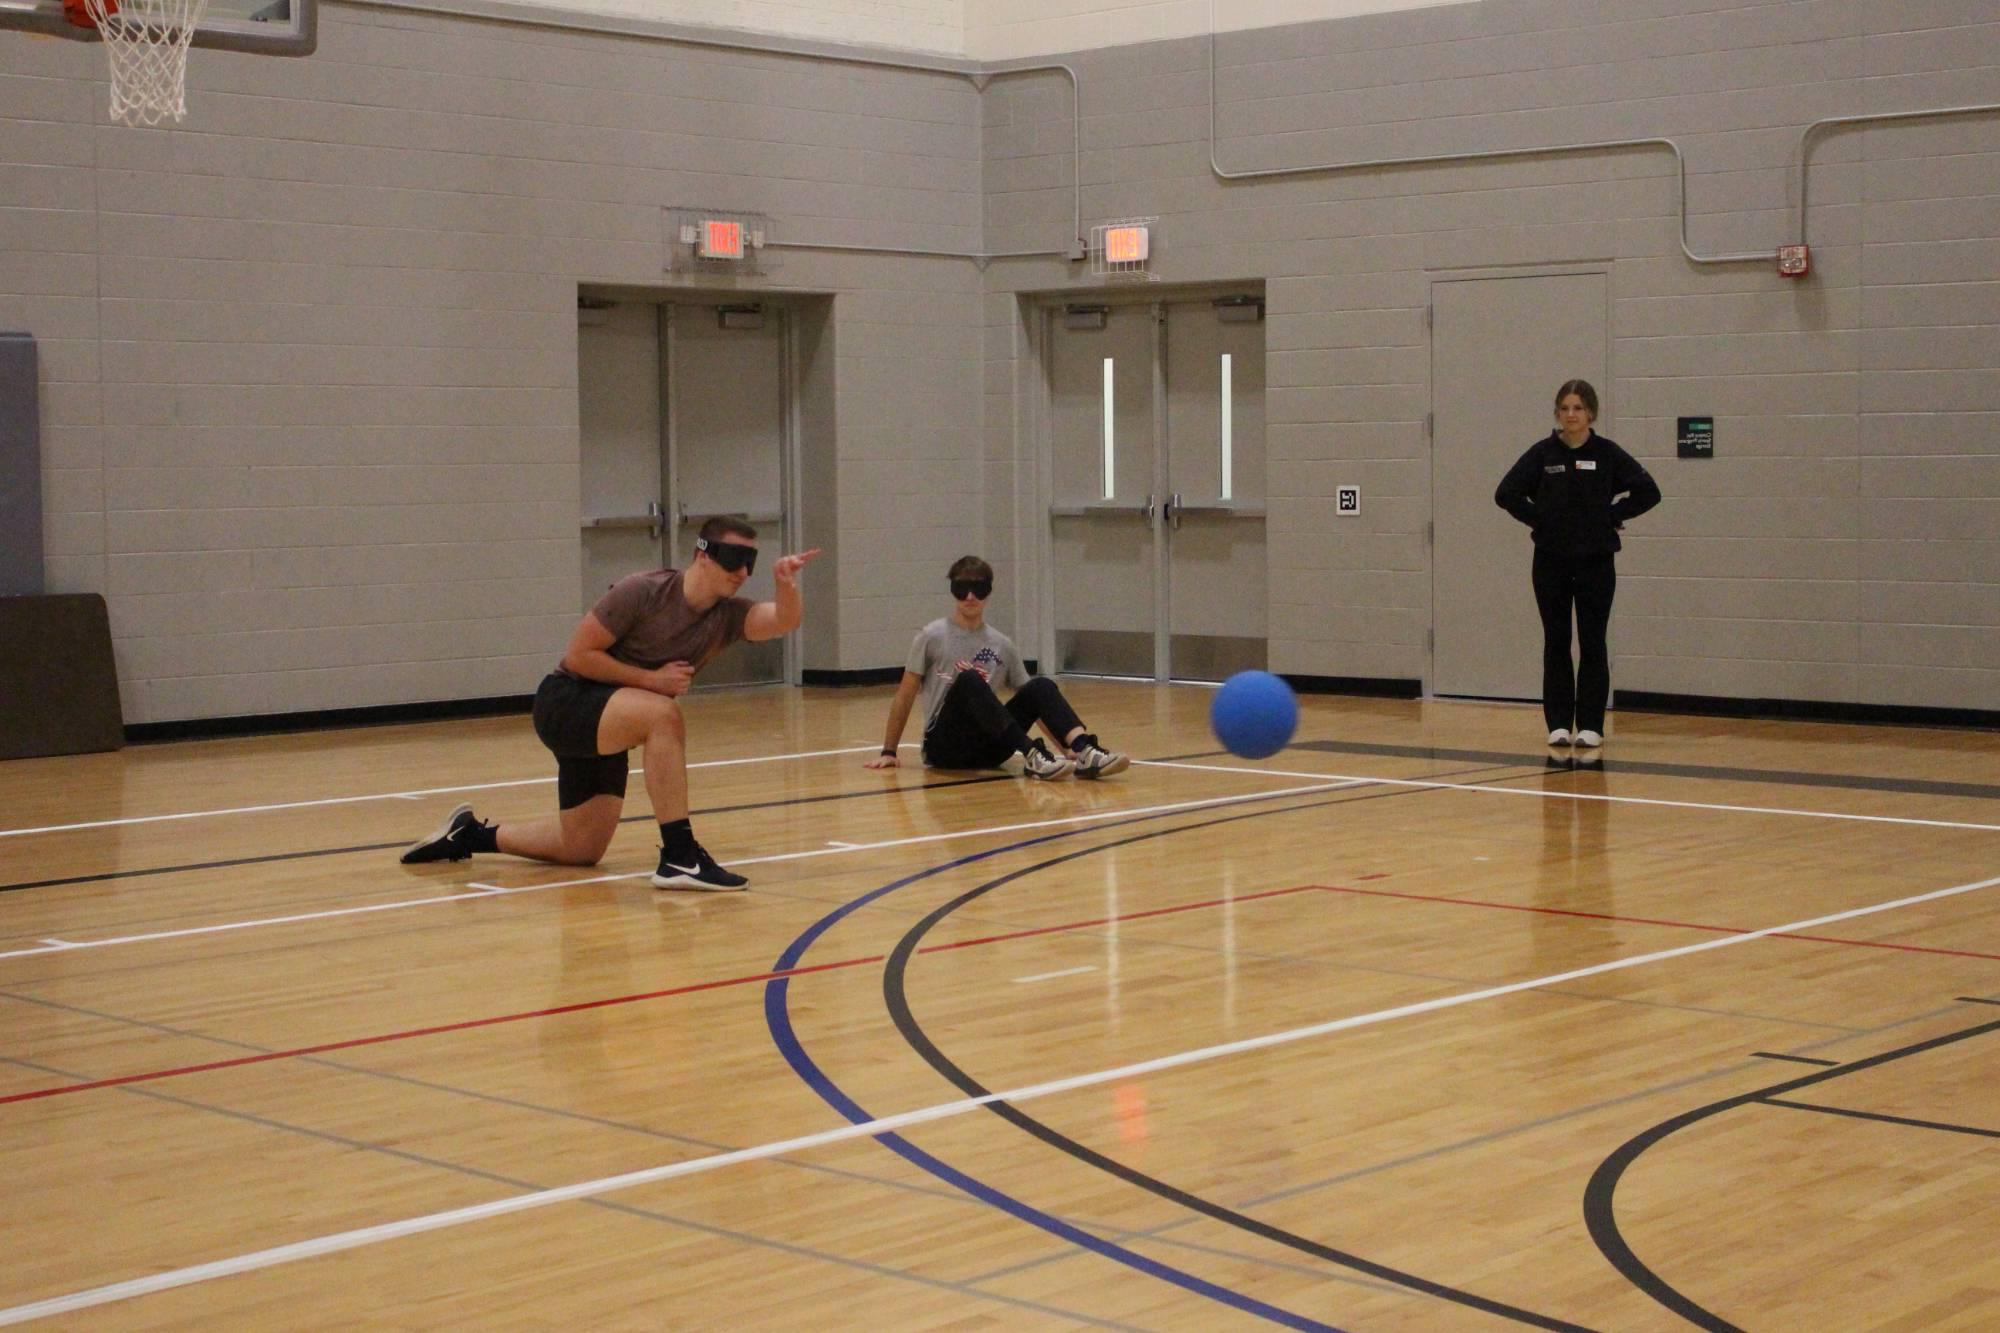 Student playing goalball at an adaptive intramural sports event